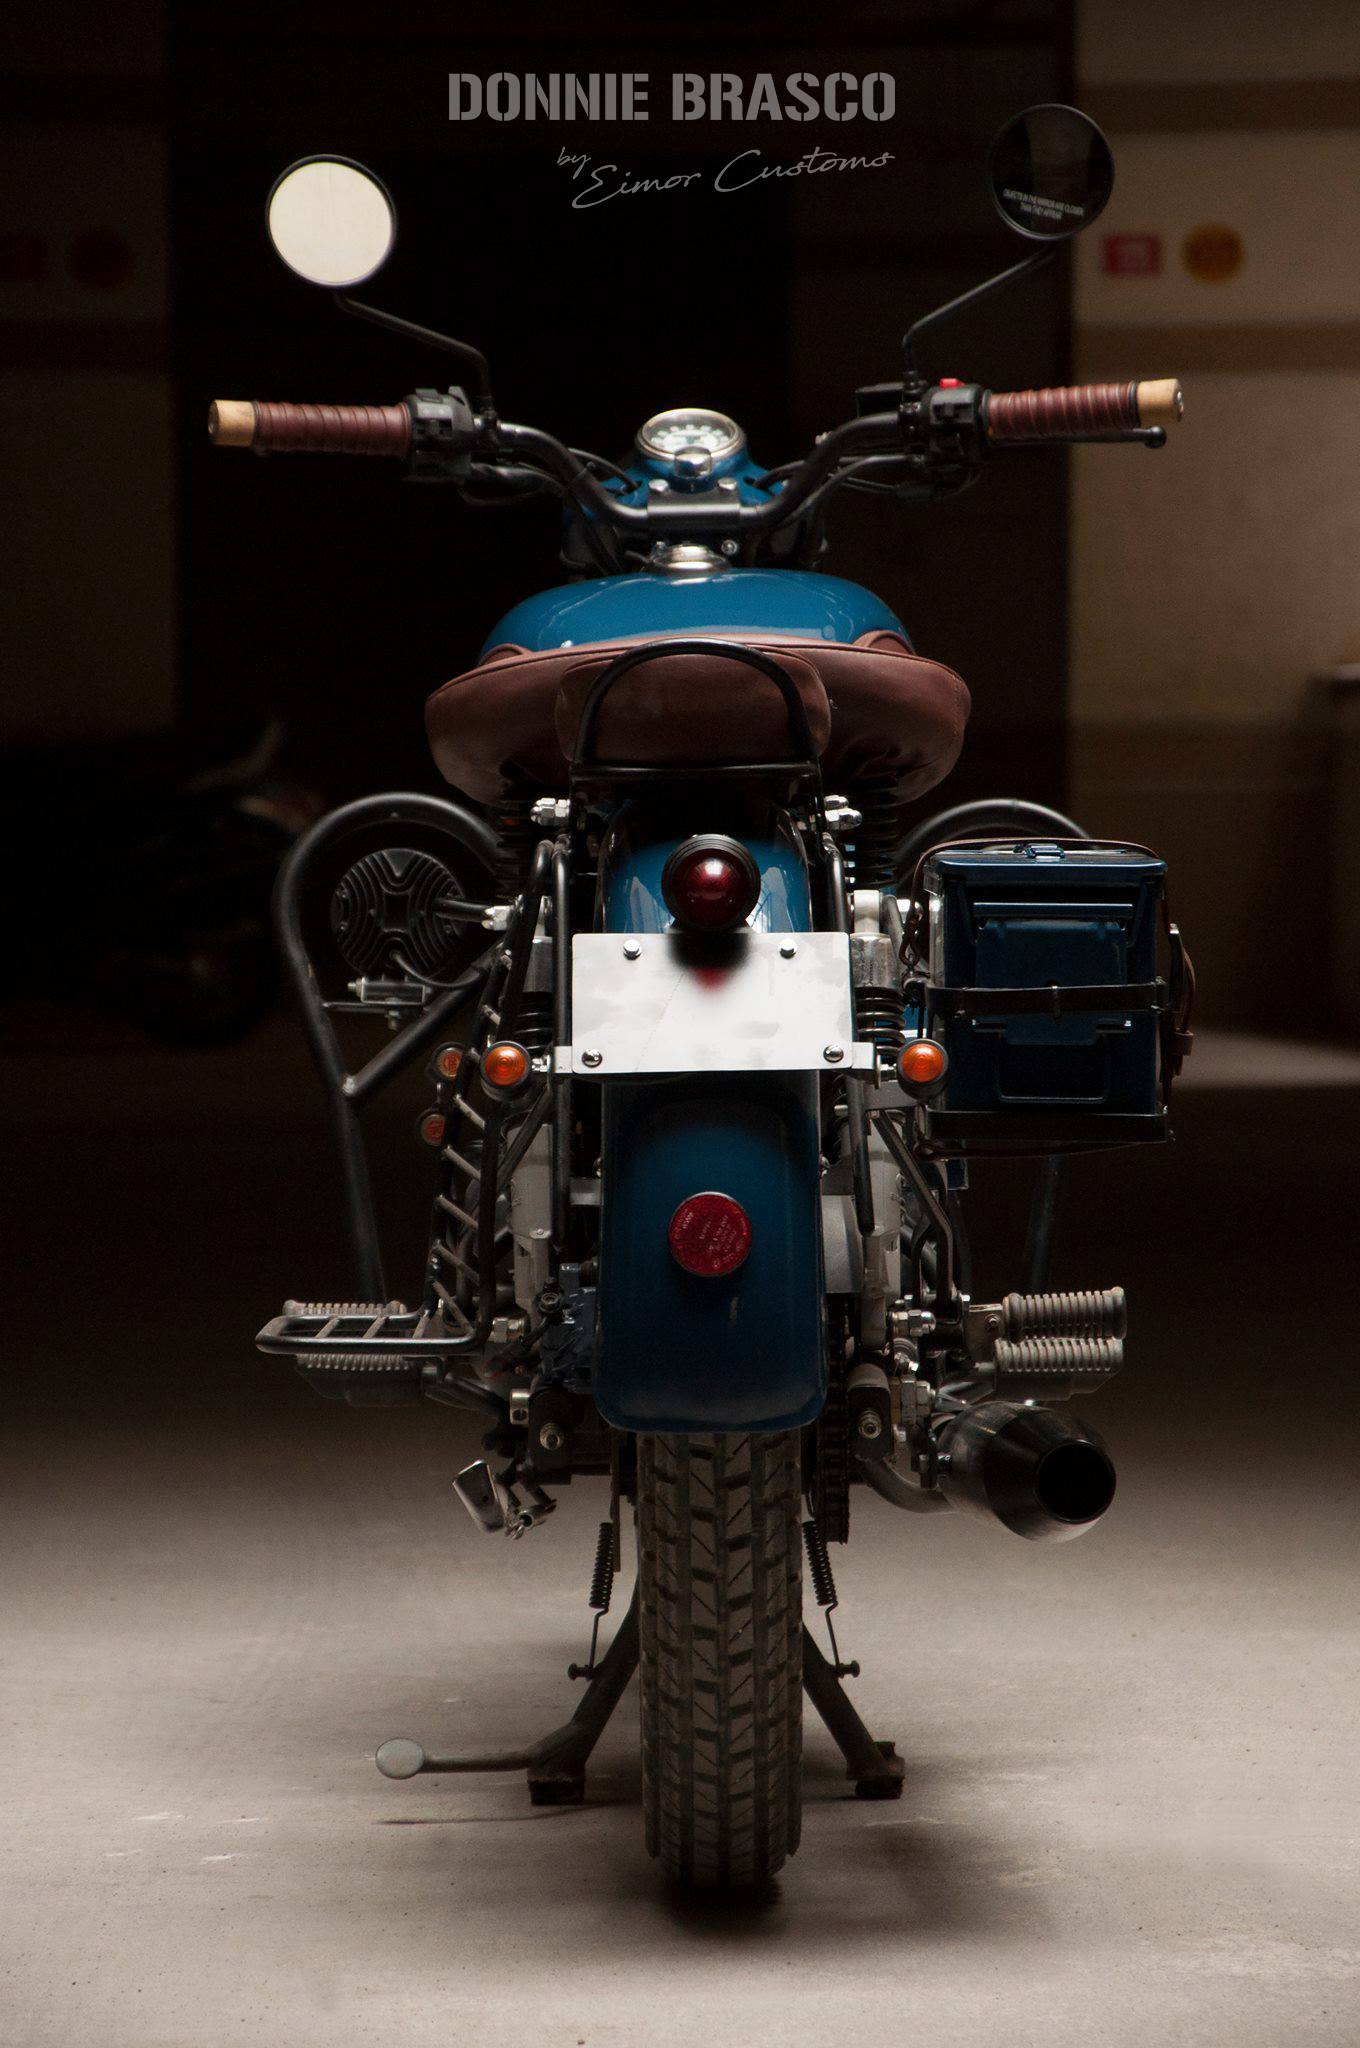 EIMOR Royal Enfield Classic 'Donnie Brasco' Details and Photos - foreground